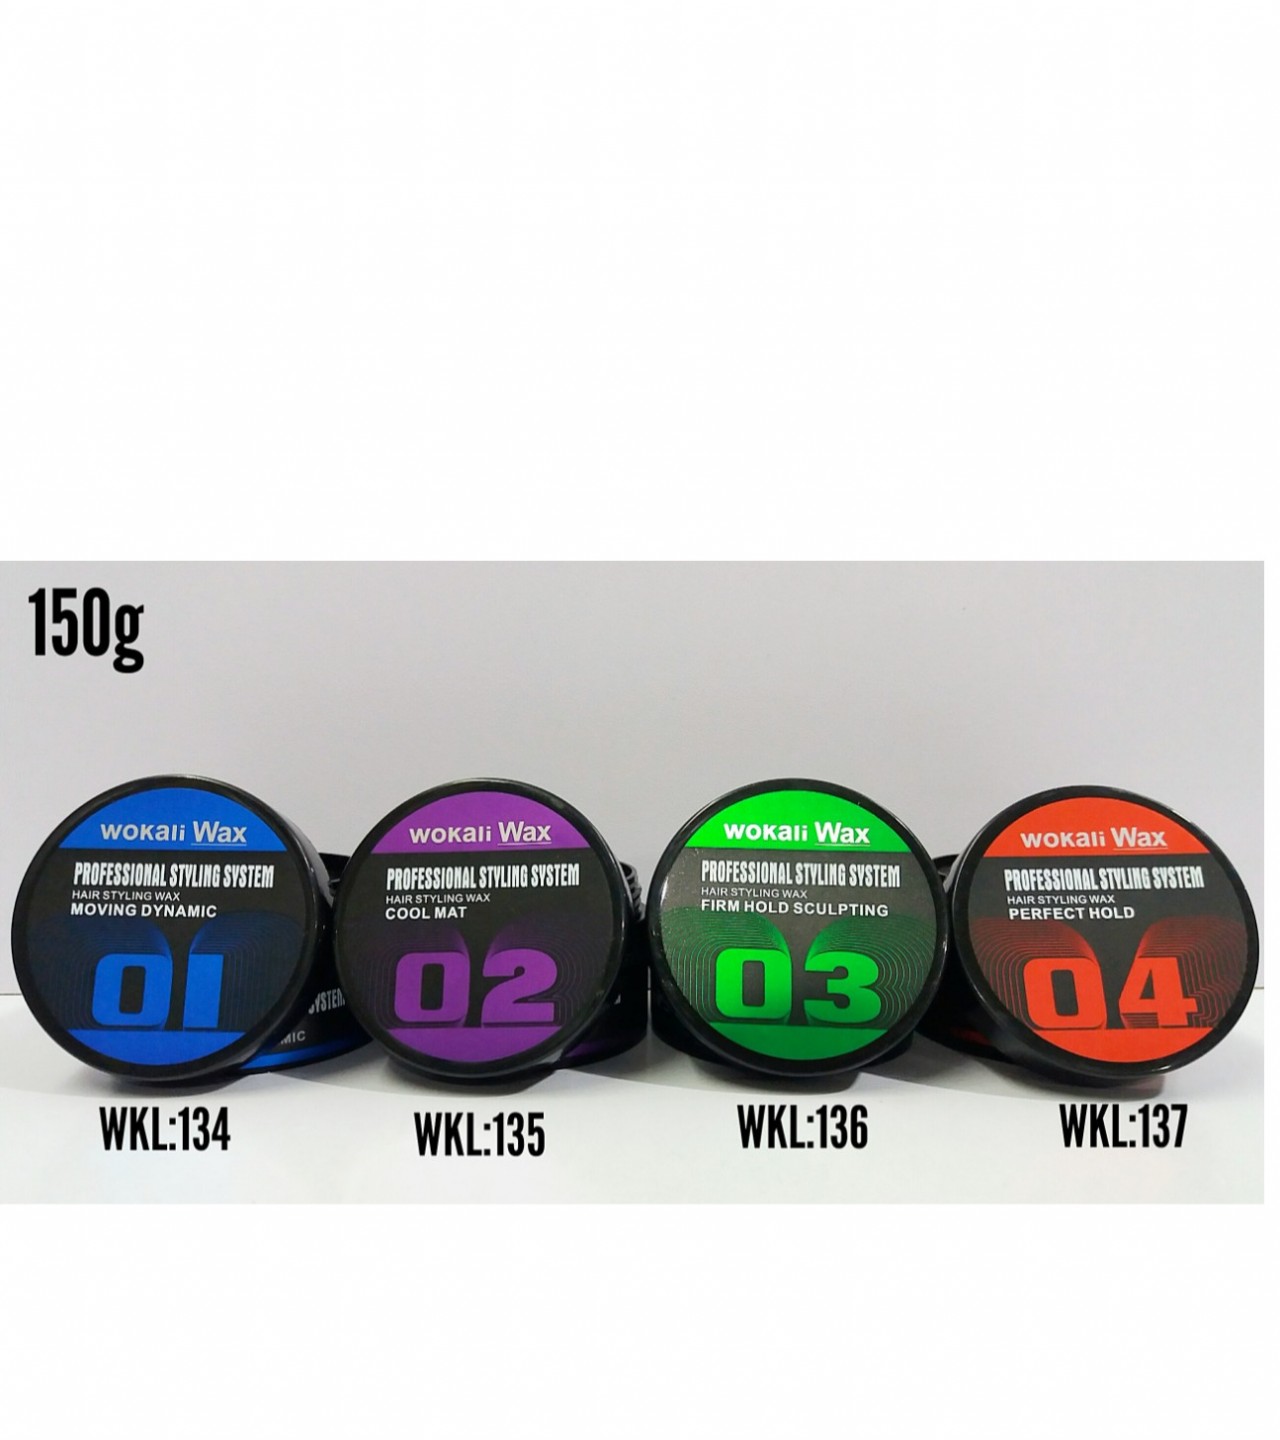 Wokali Hair Styling Wax Perfect Hold 04 Professional Styling System 150 g